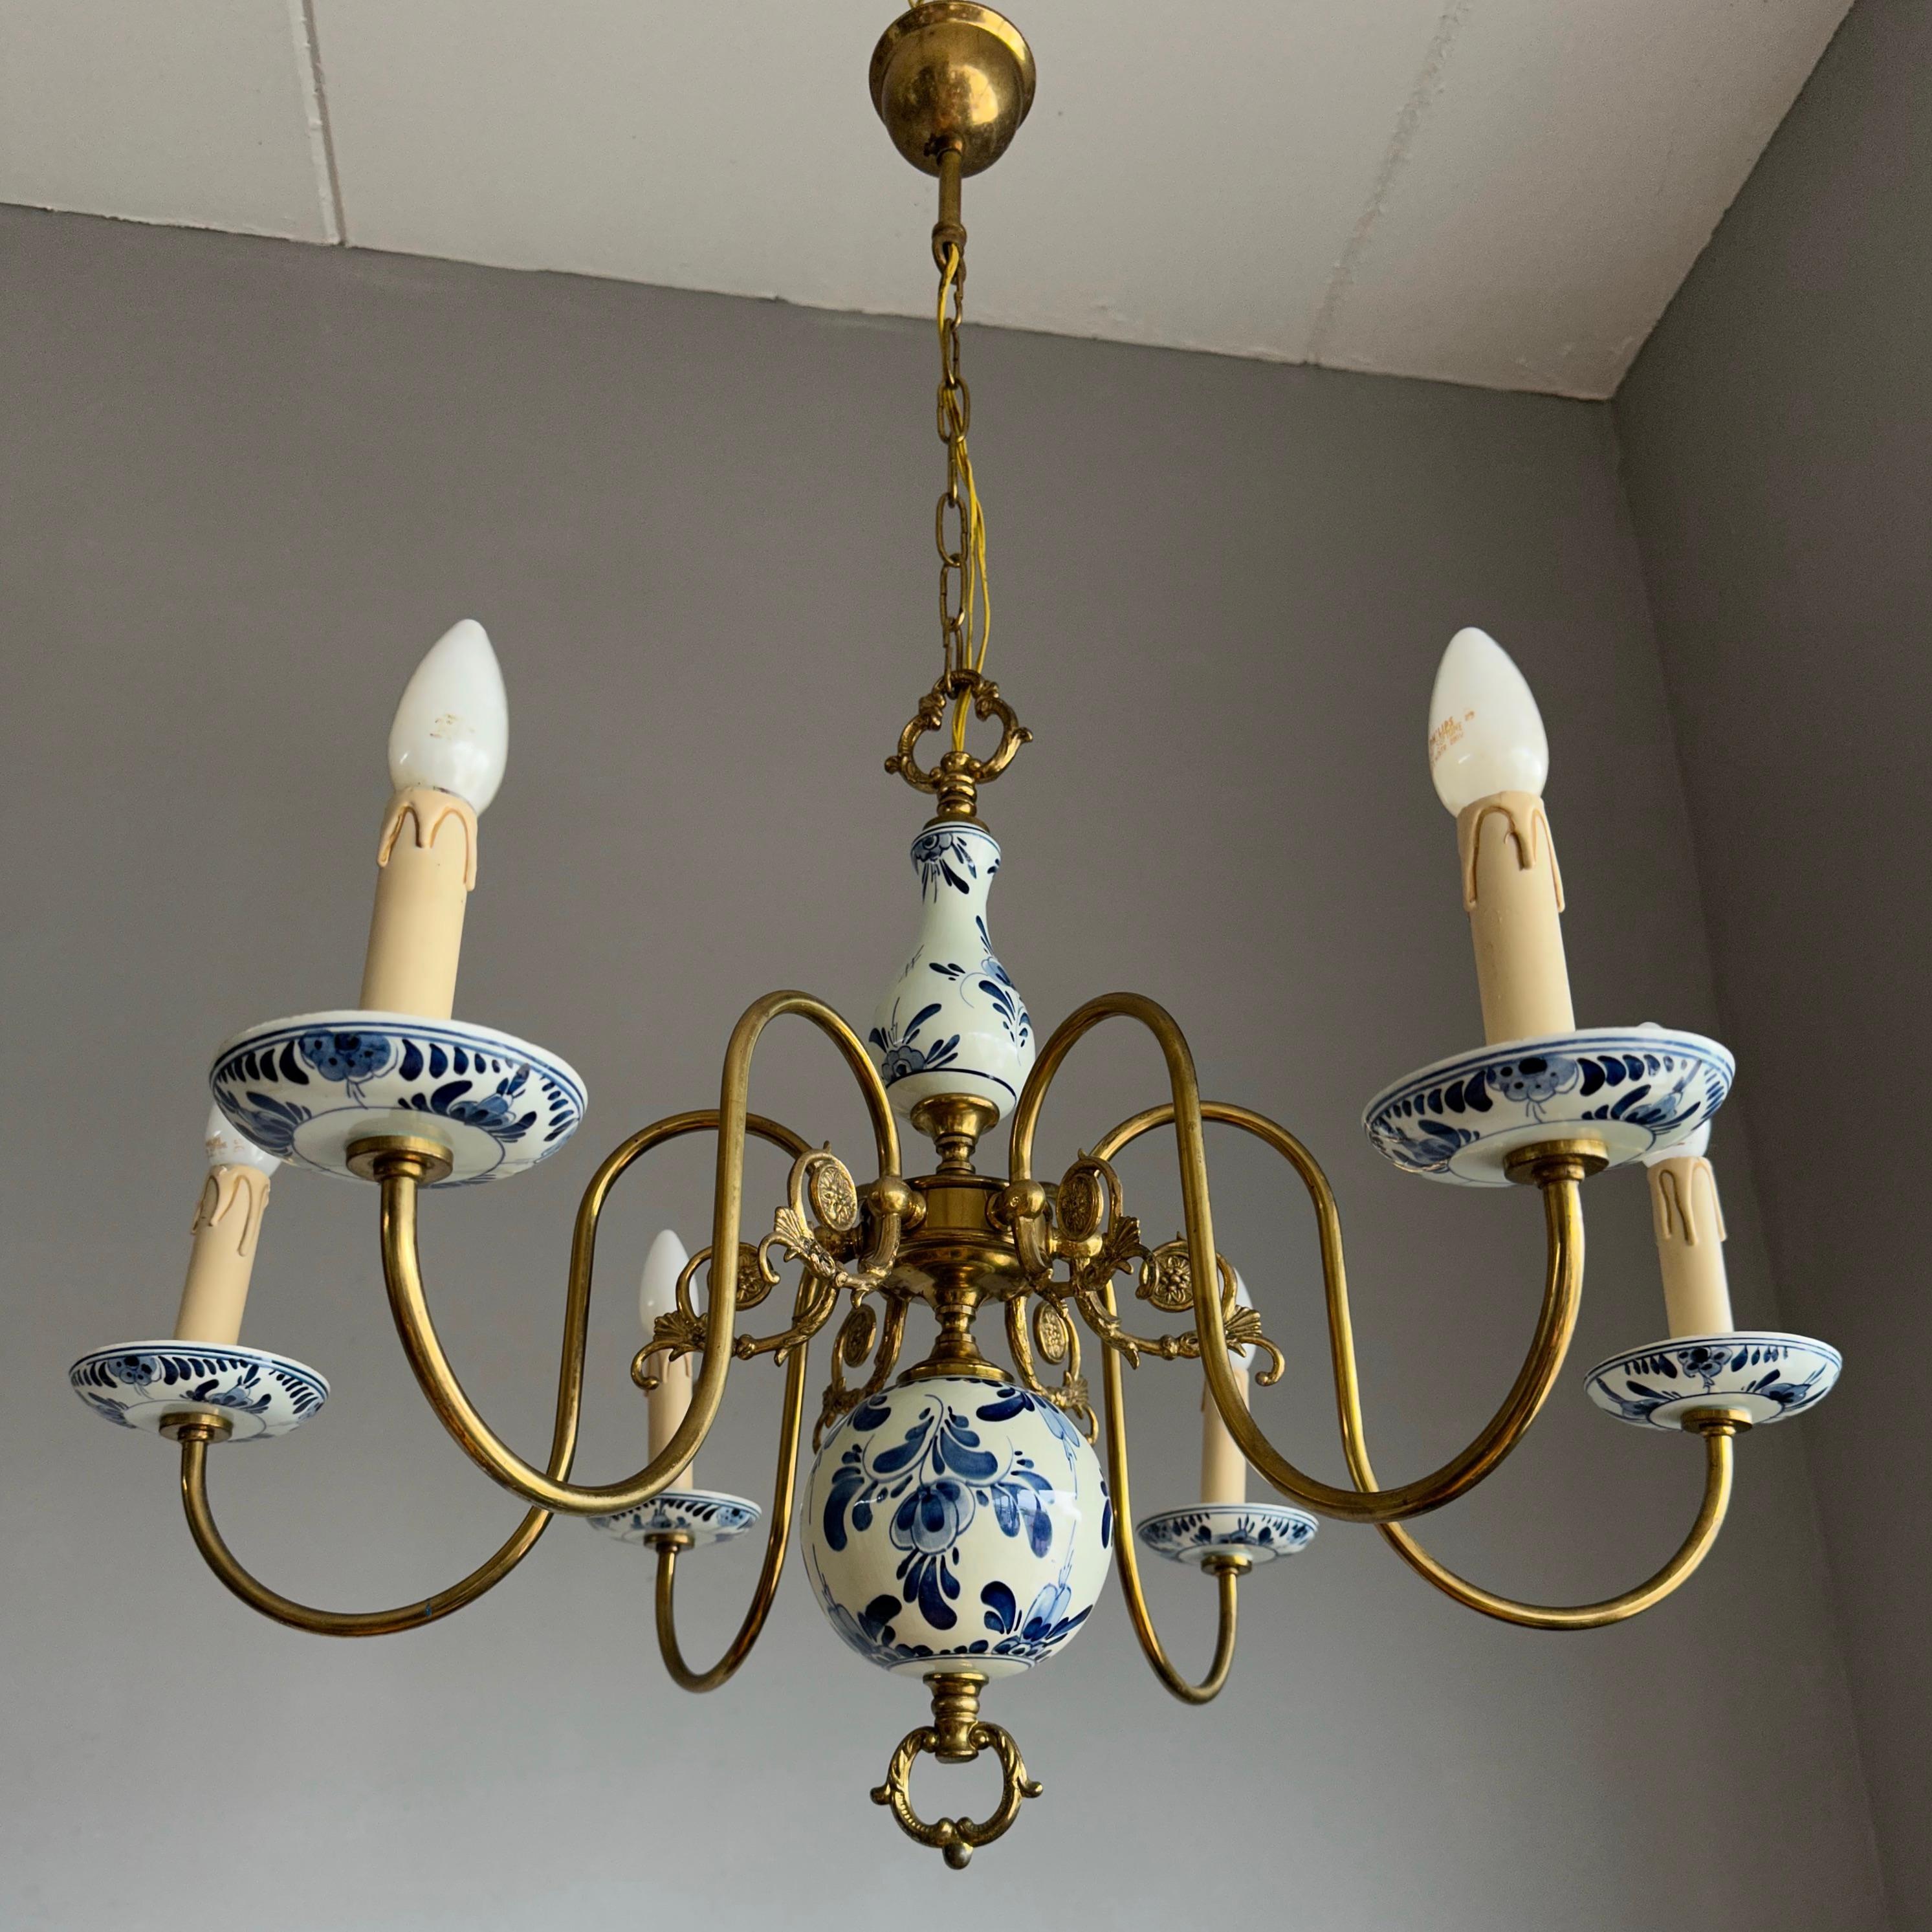 1940s Dutch Brass and Porcelain Hand Painted Delft Blue and White Chandelier In Good Condition For Sale In Lisse, NL